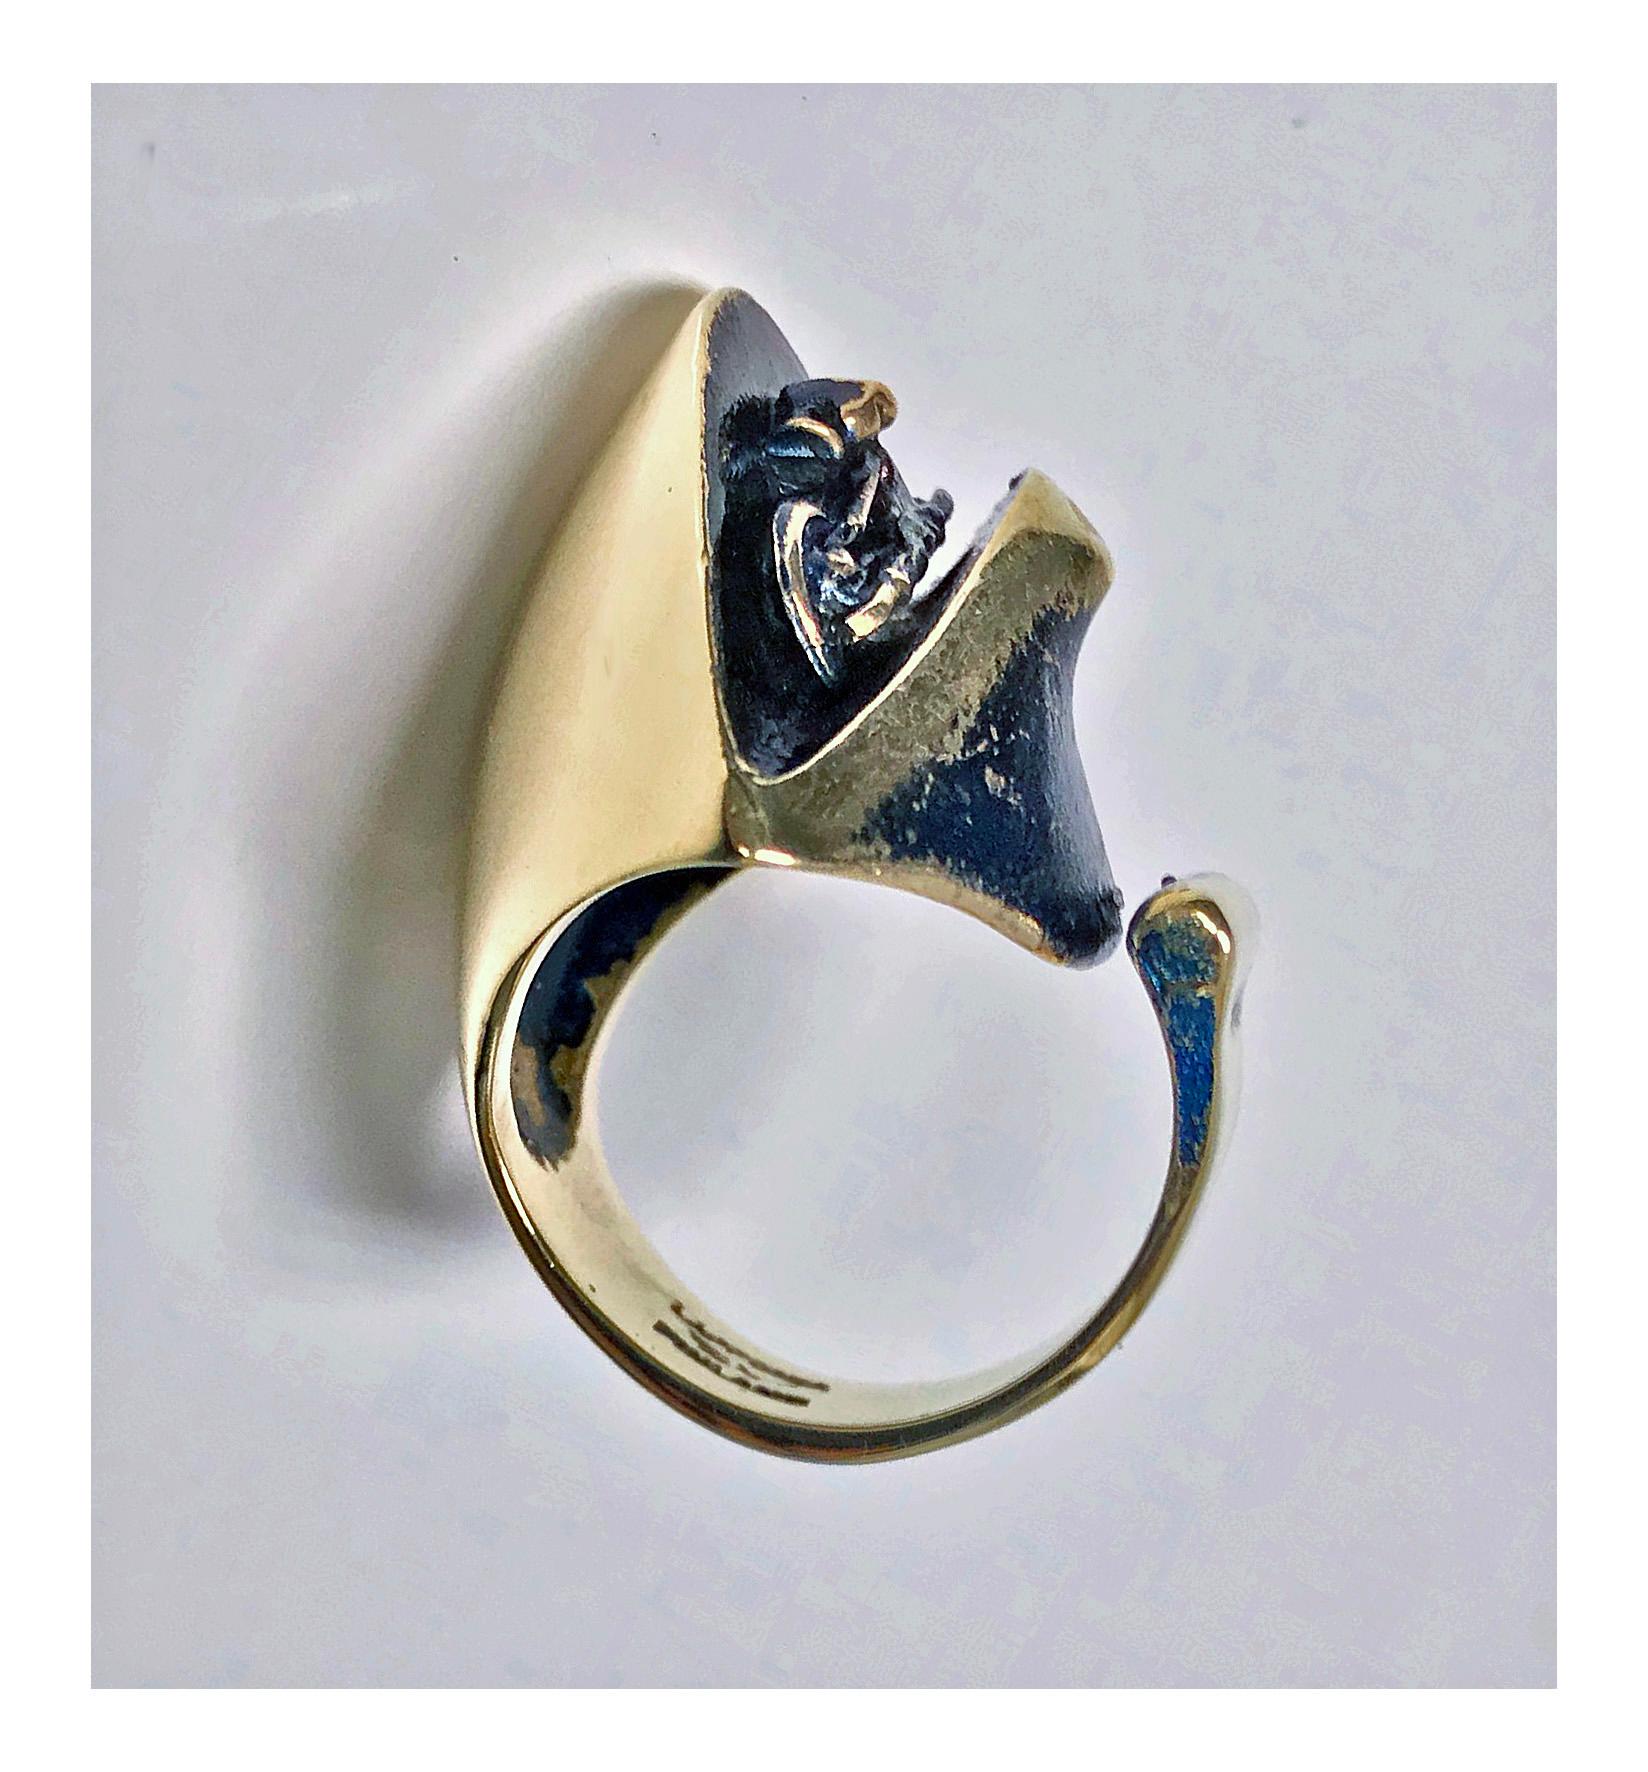 Rare Björn Weckström for Lapponia abstract polished bronze ring with oxidised tones of mauve enamel and sculptural design. The open ended design allows for a ring size of approximately 7.5-9.5 (or more if opened up further). Max height from top of